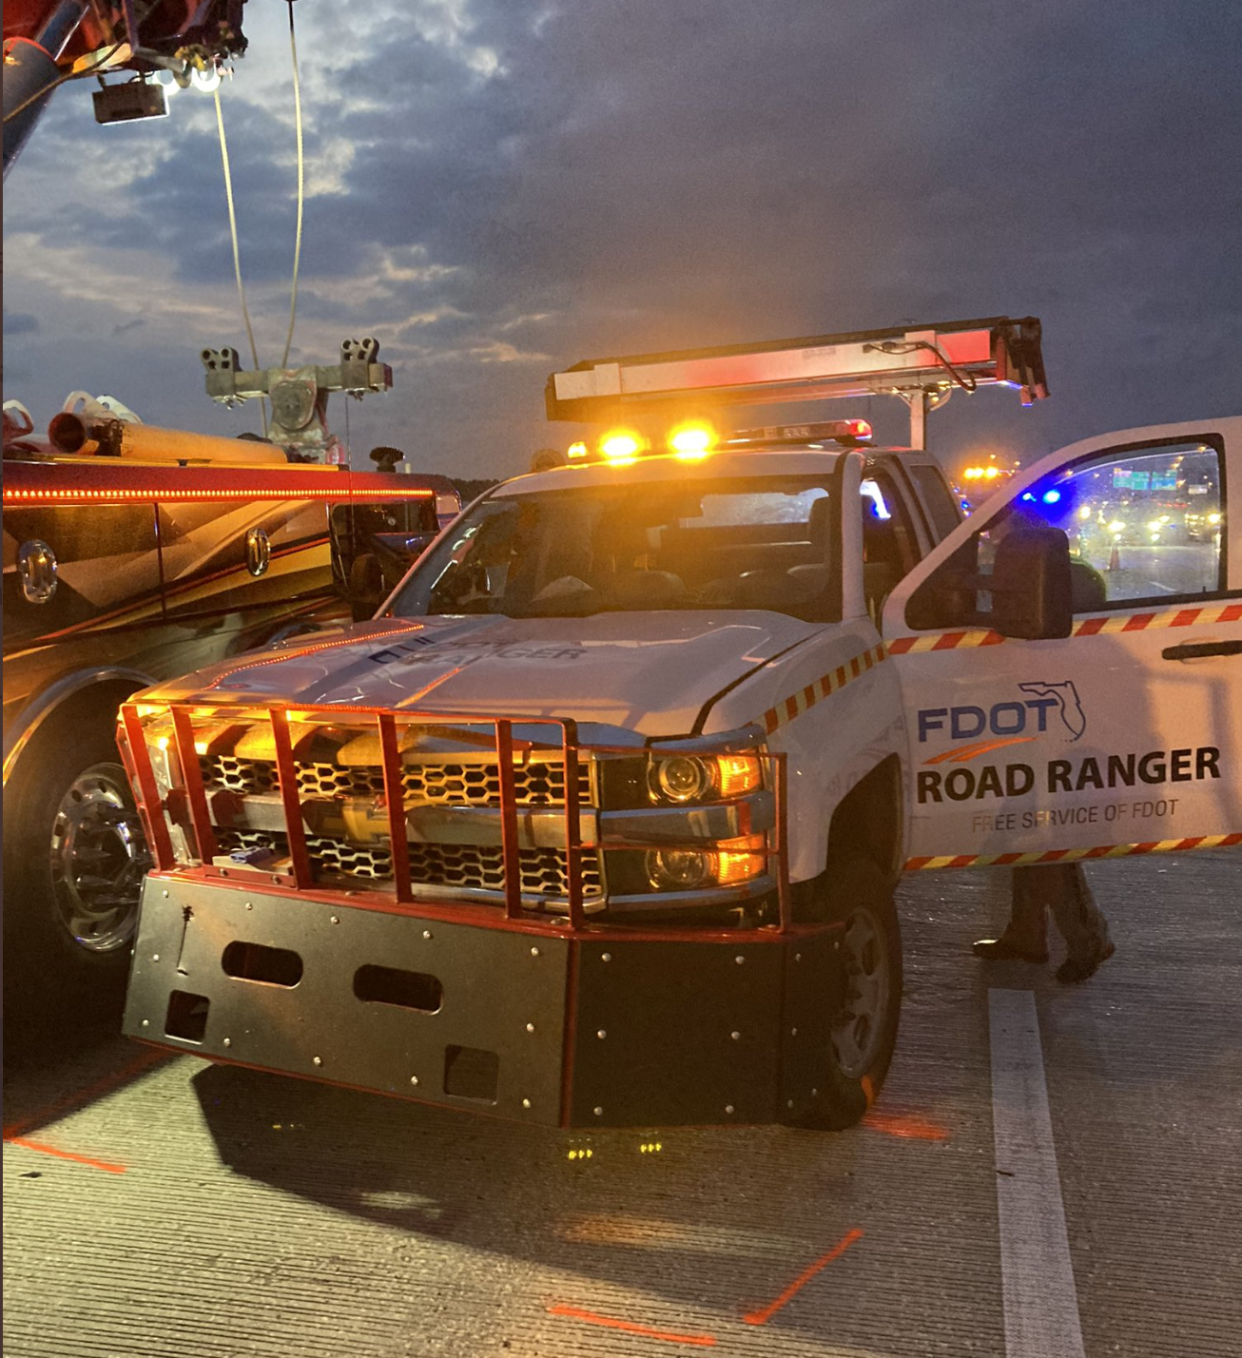 A Florida Department of Transportation Road Ranger remains on the scene of a deadly crash after the truck hit another pickup on the Buckman Bridge, knocking it over the barricade into the St. Johns River on Feb. 28 in Jacksonville.